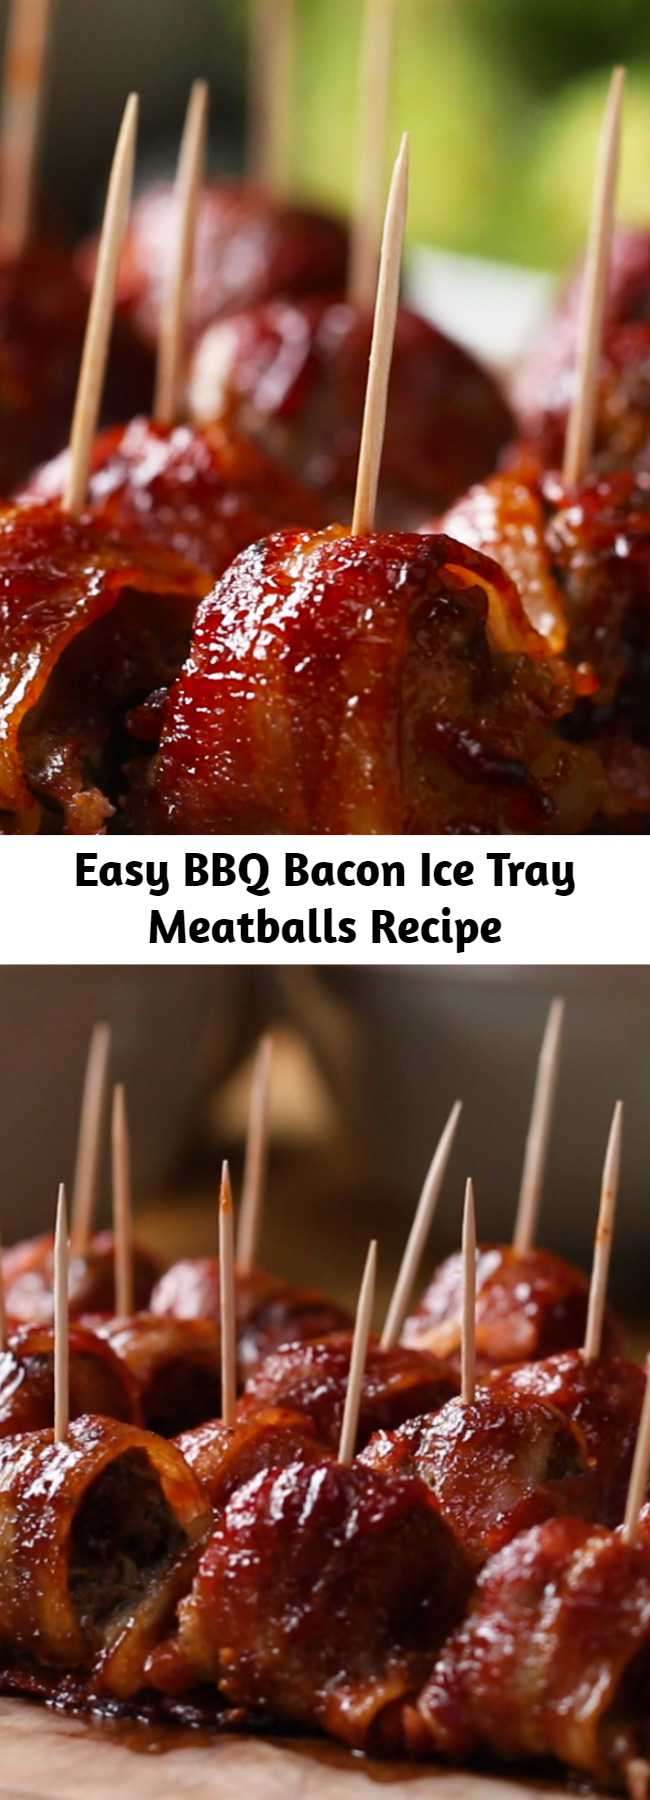 Easy BBQ Bacon Ice Tray Meatballs Recipe - I made these & they were a HUGE hit!! Didn’t think they were too much work. Everyone was raving about these & I’m going to make them again very soon! Several people requested the recipe. Easy to put together!